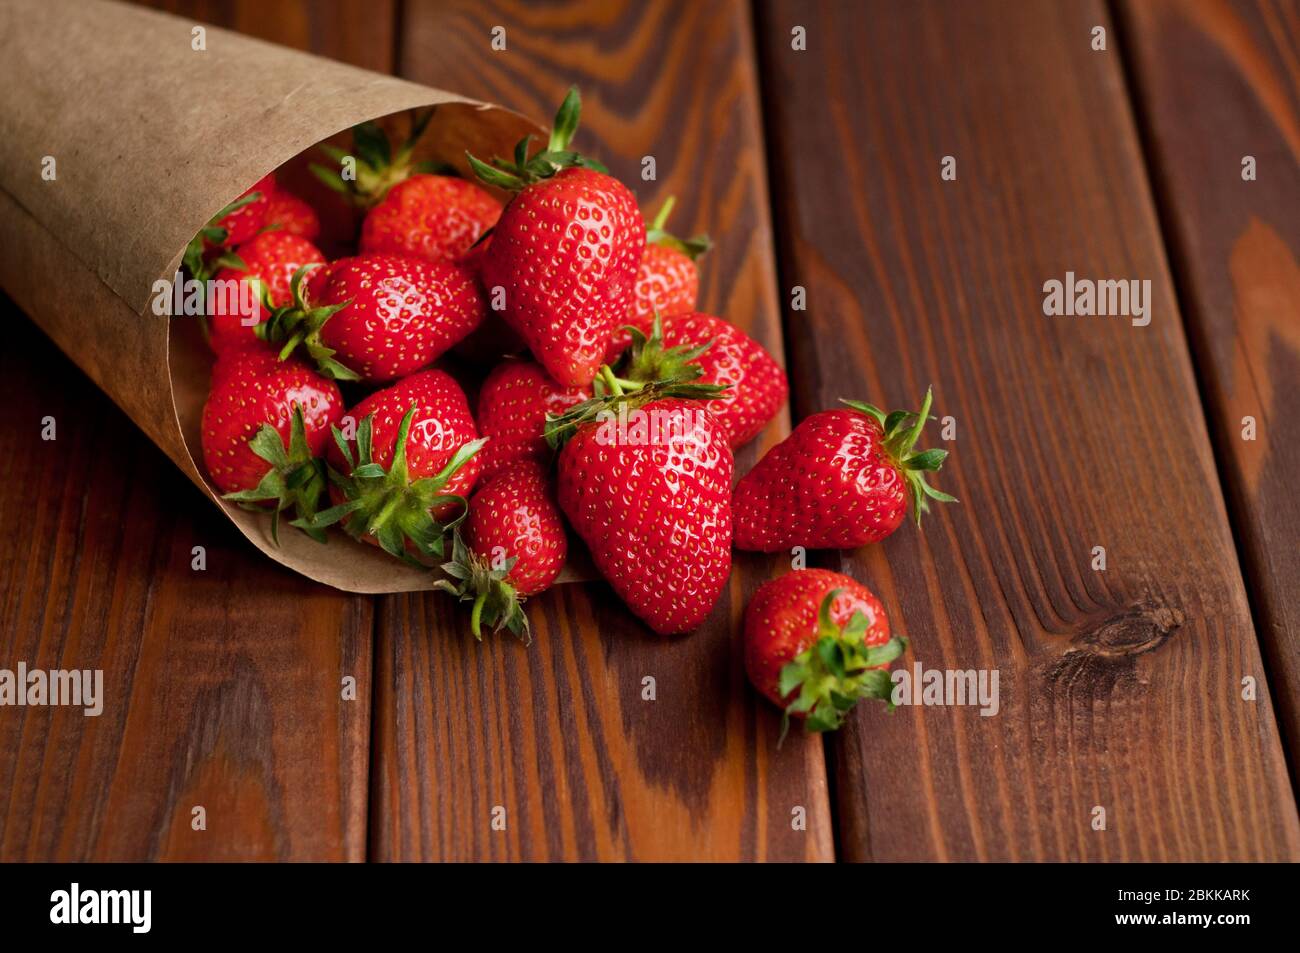 Ripe strawberries in craft paper on a wooden background. Healthy fresh food. Top view Stock Photo